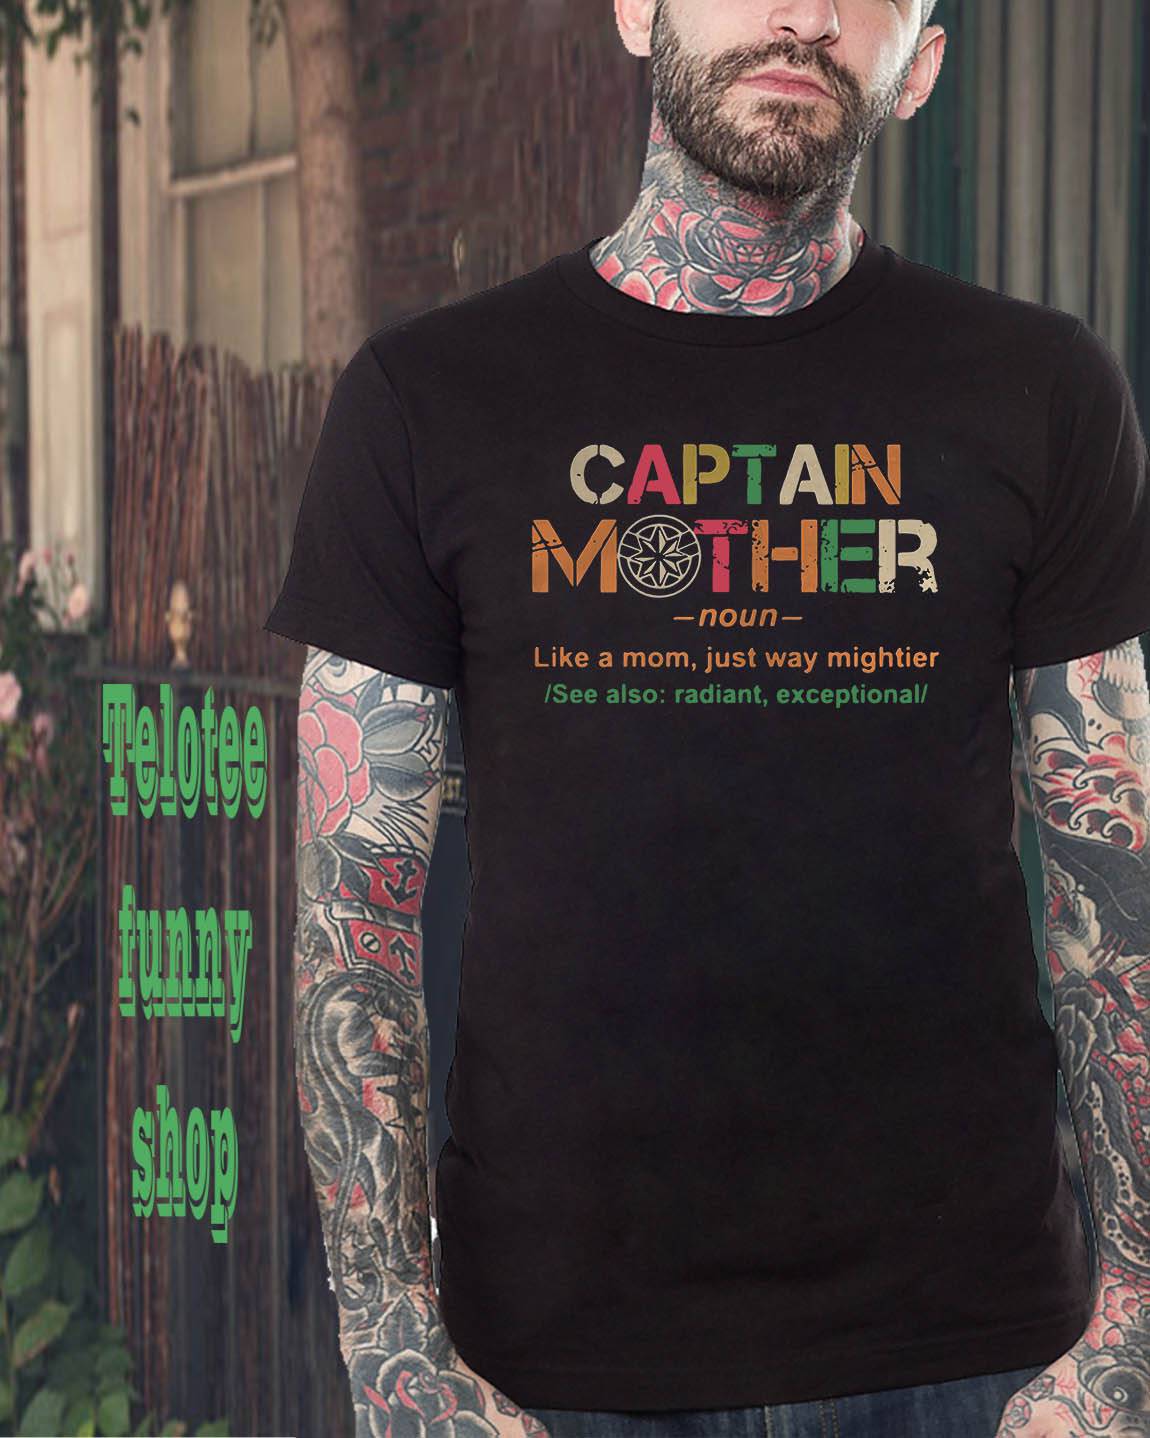 Captain mother noun like a mom just way mightier